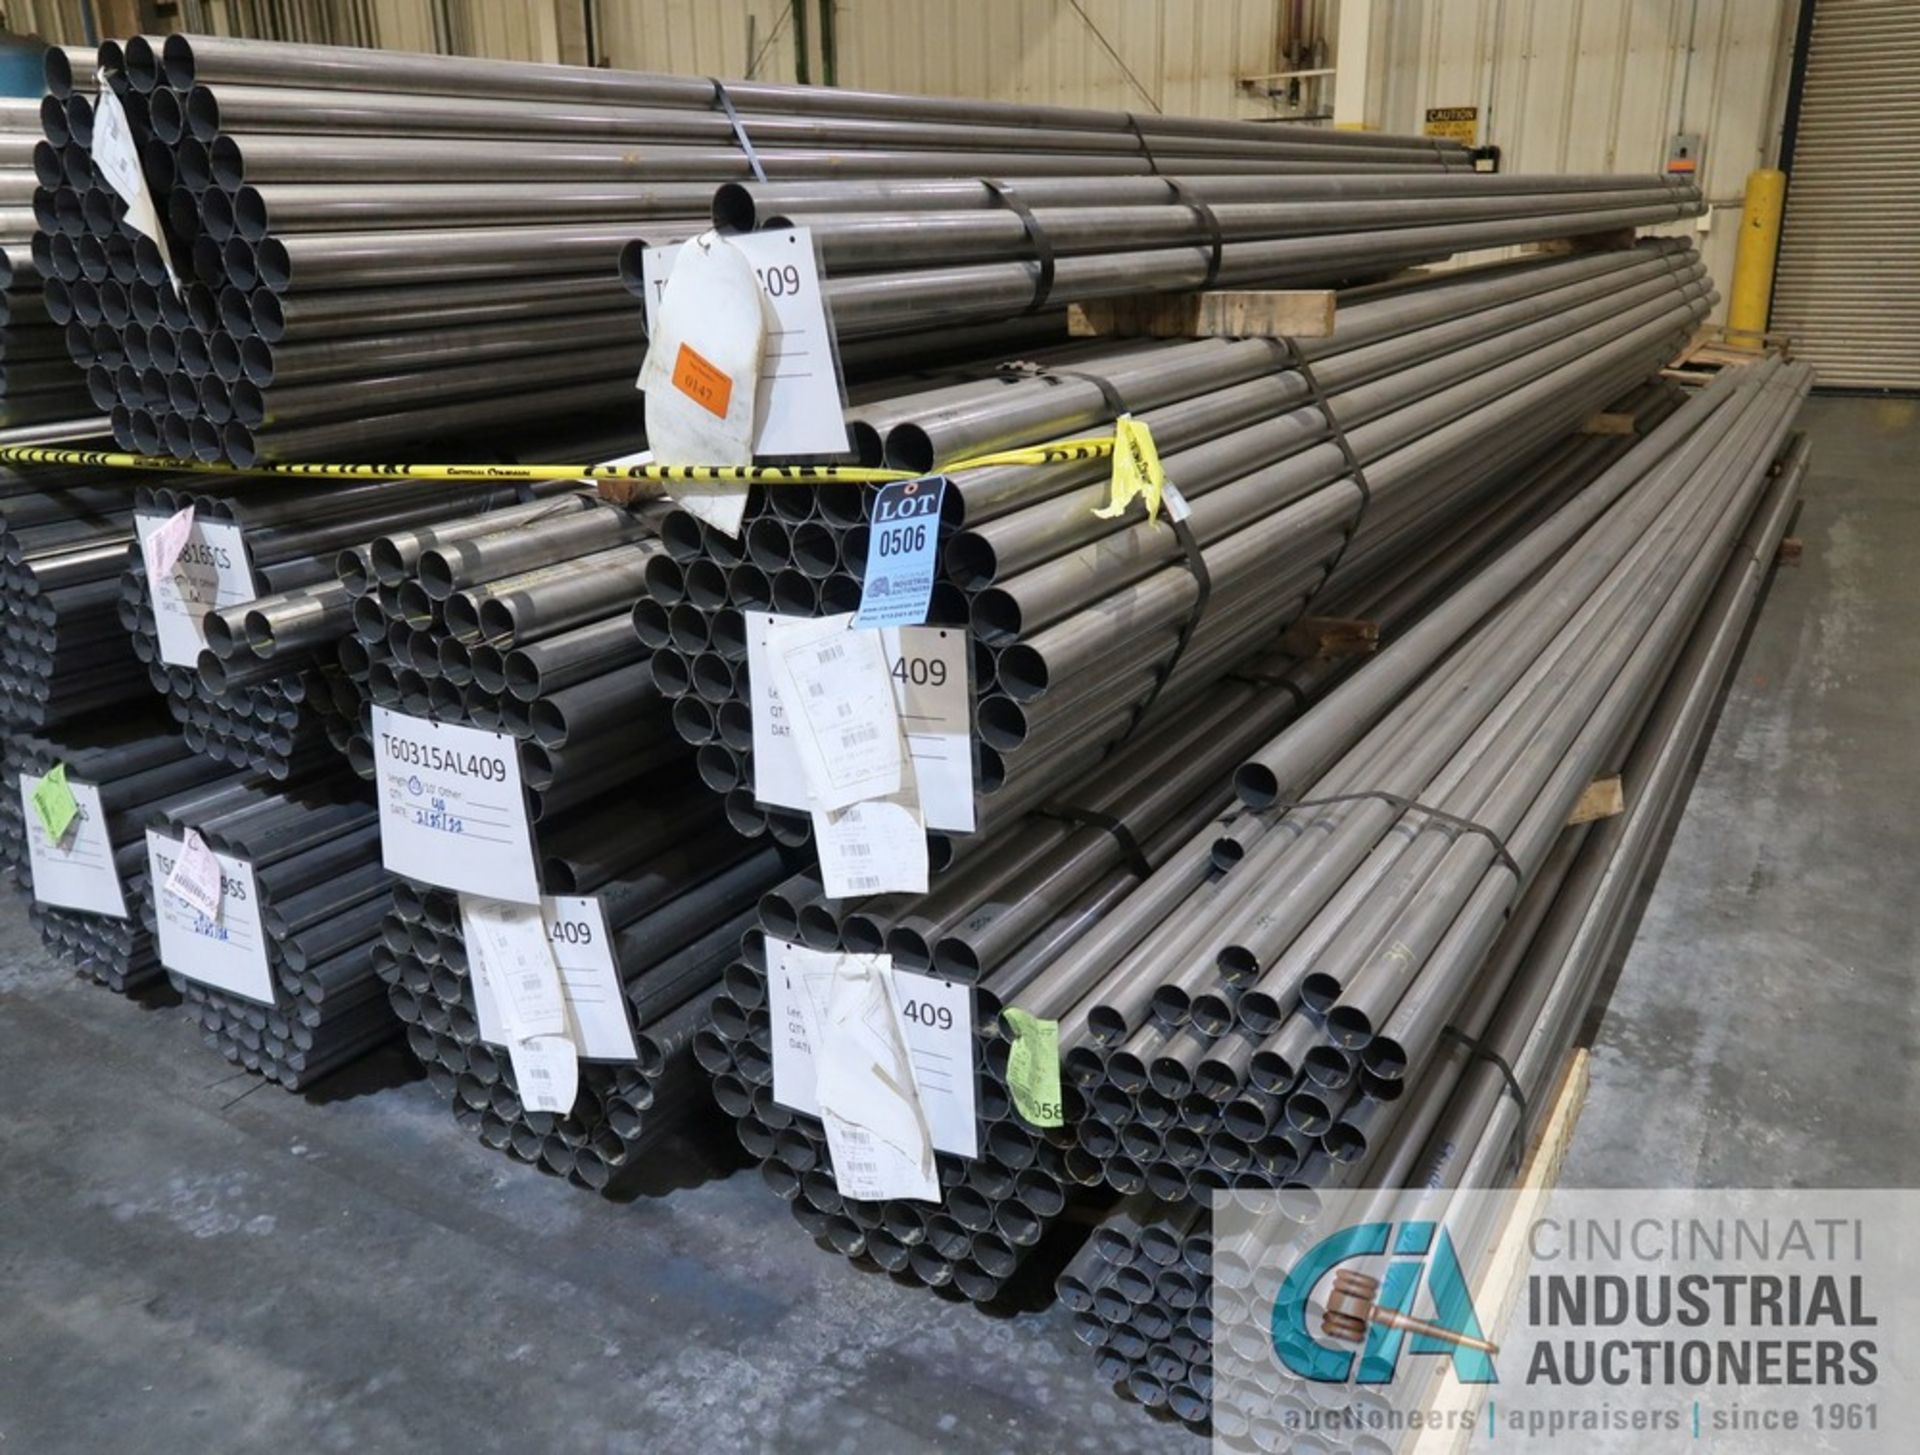 (LOT) (34) BUNDLES OF 20' LONG X .065 ALUMINIZED STEEL TUBING, APPROX. 2,080 TOTAL PIECES, APPROX. - Image 10 of 11